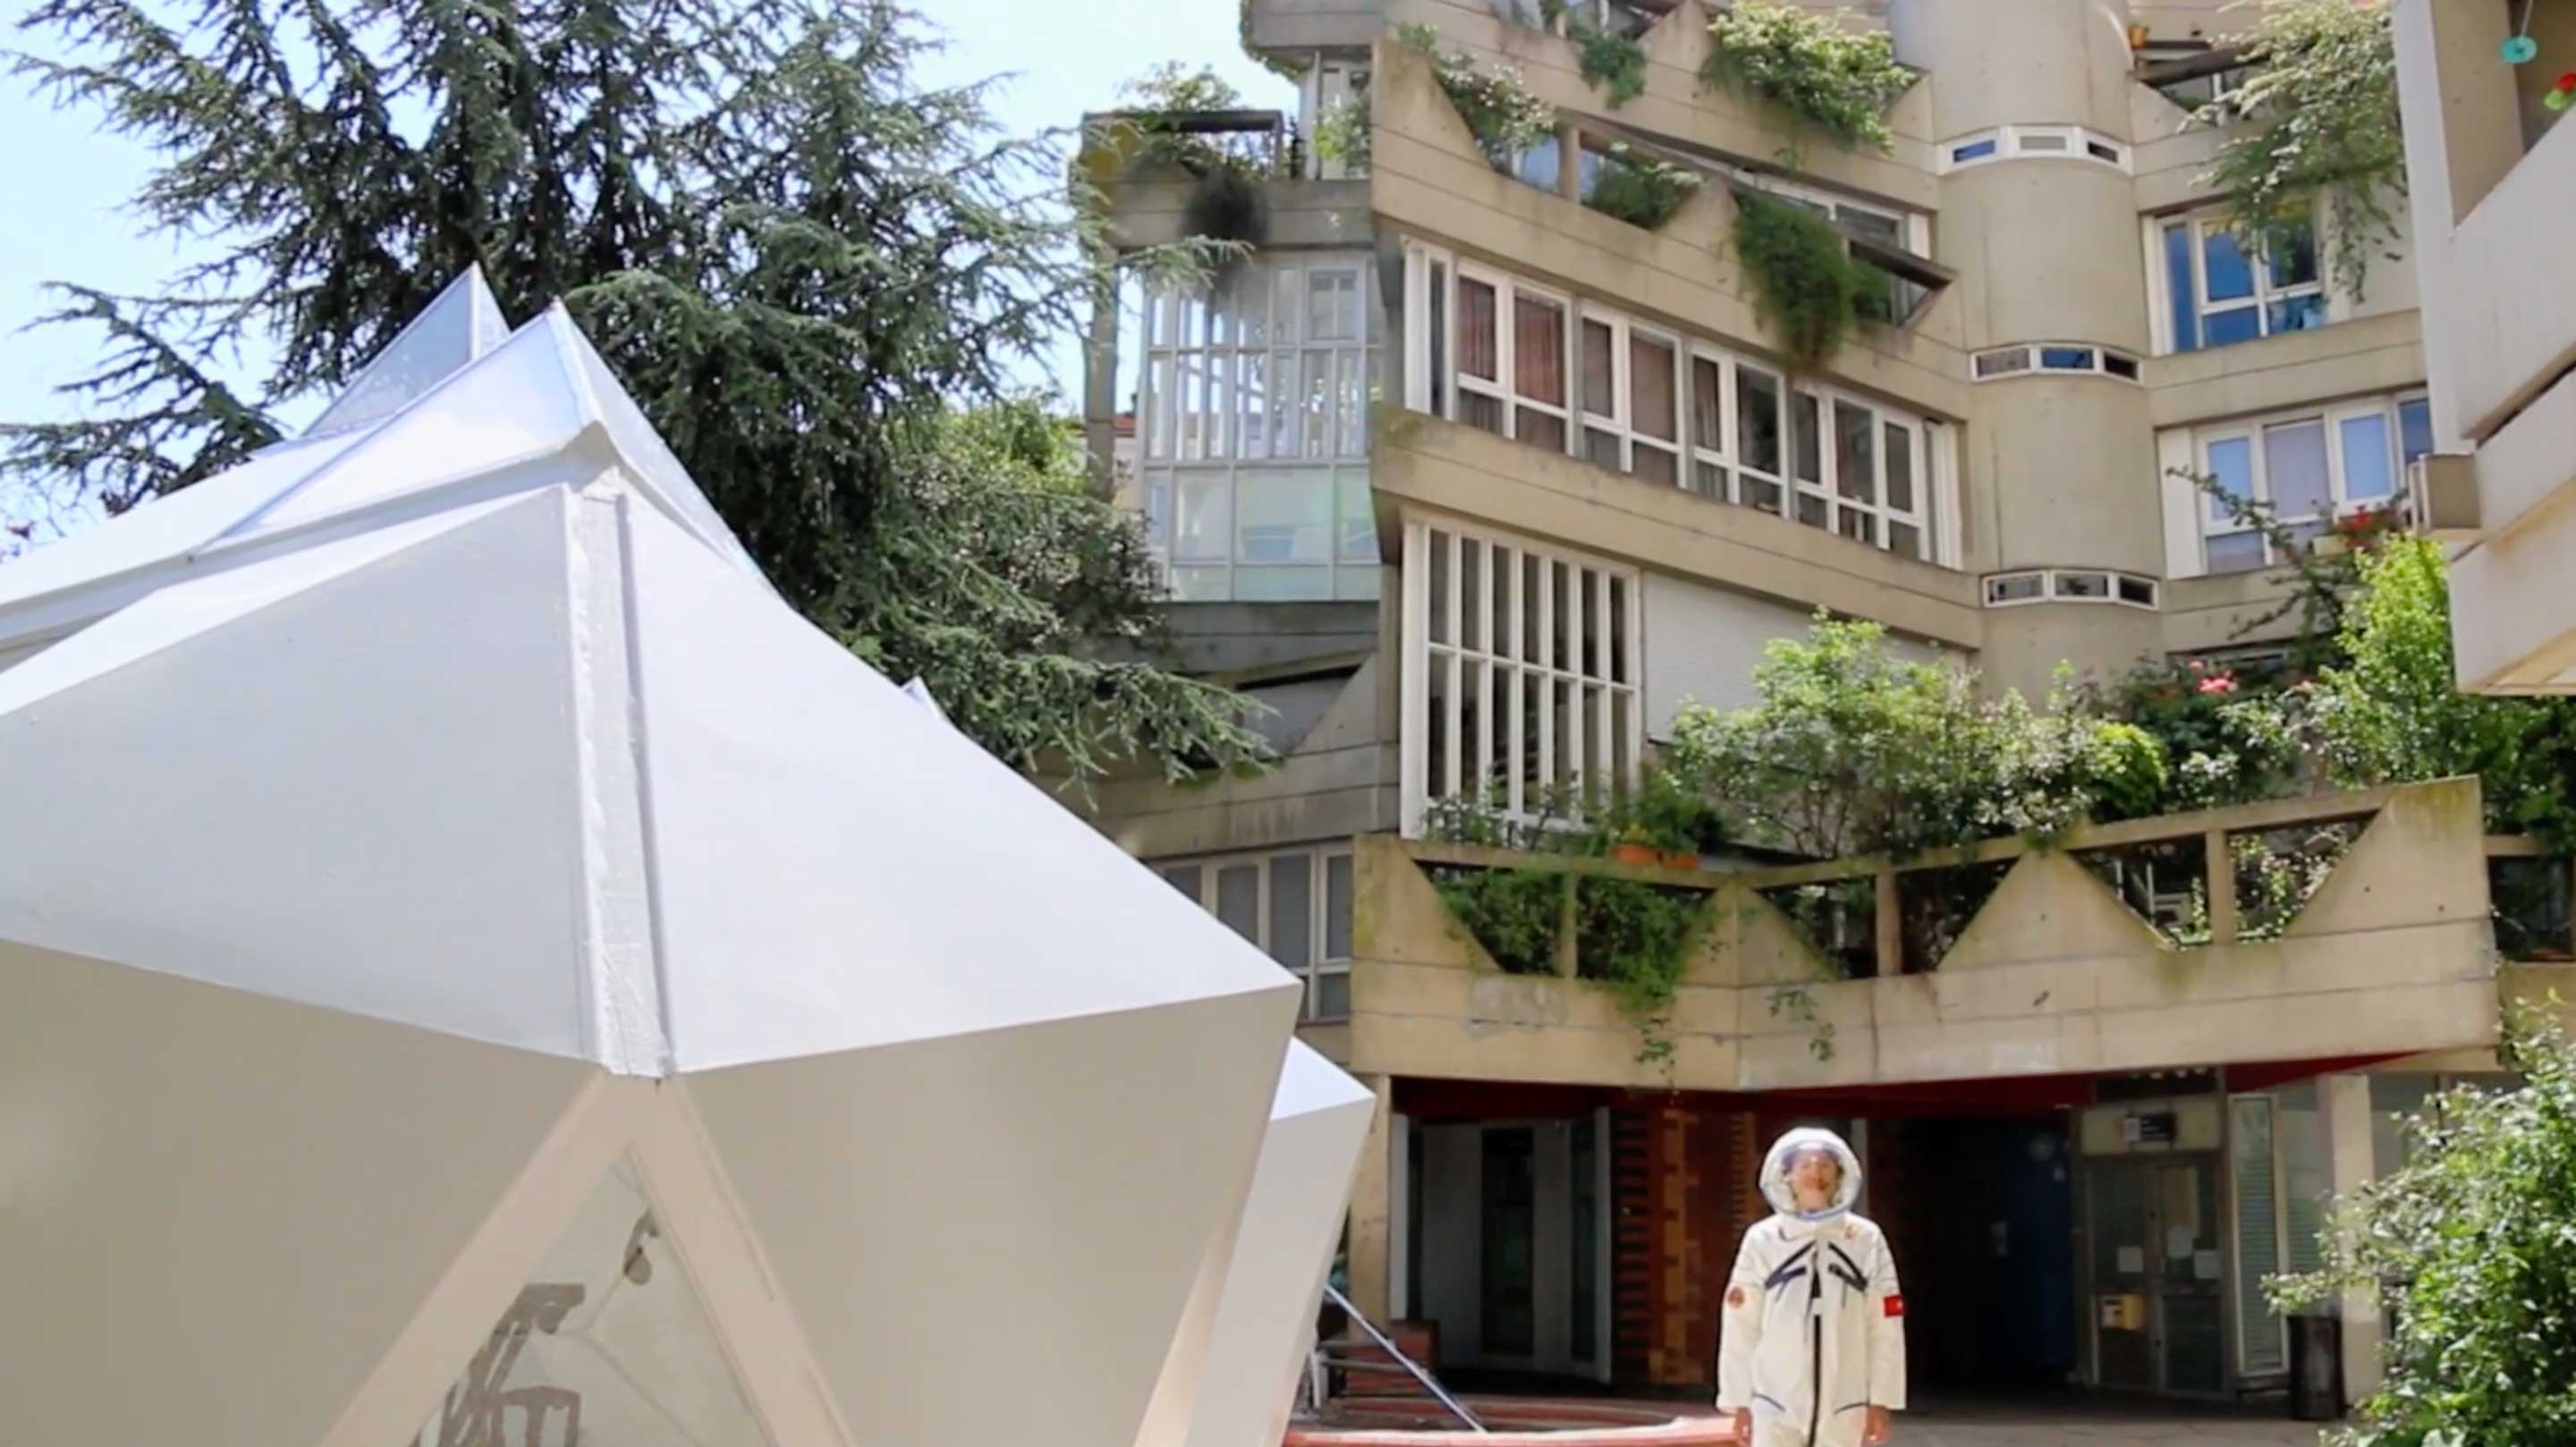 A person in an astronaut uniform stands outside of the angular architecture of Paris’s Ivry-sur-Seine commune. Next to him is a white, inflatable modular structure that matches the star-pointed forms of the housing complex.